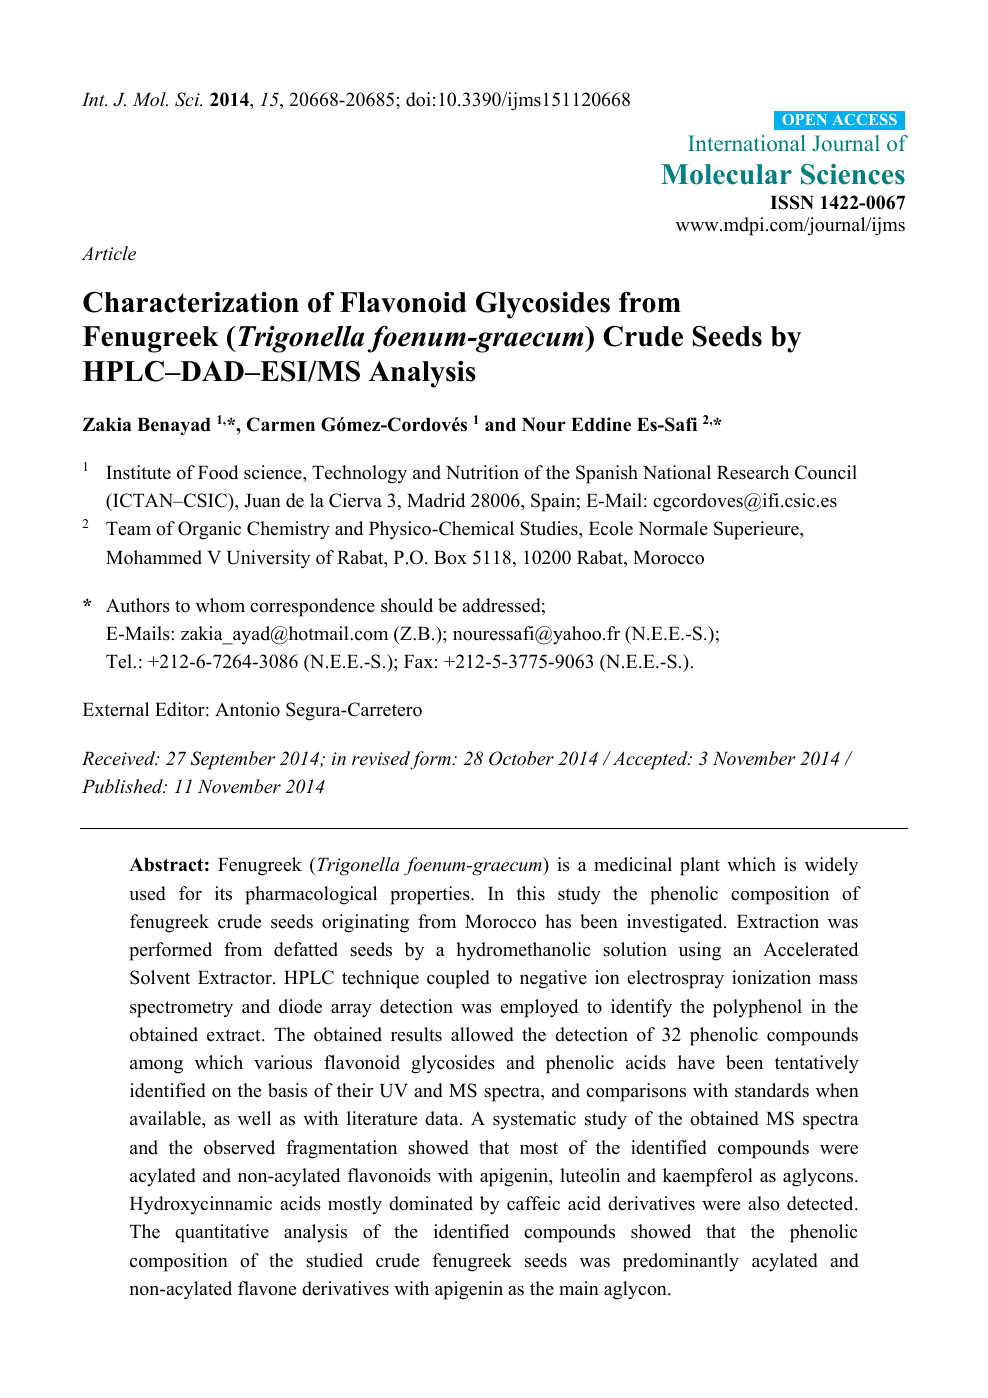 Characterization Of Flavonoid Glycosides From Fenugreek Trigonella Foenum Graecum Crude Seeds By Hplc Dad Esi Ms Analysis Topic Of Research Paper In Chemical Sciences Download Scholarly Article Pdf And Read For Free On Cyberleninka Open